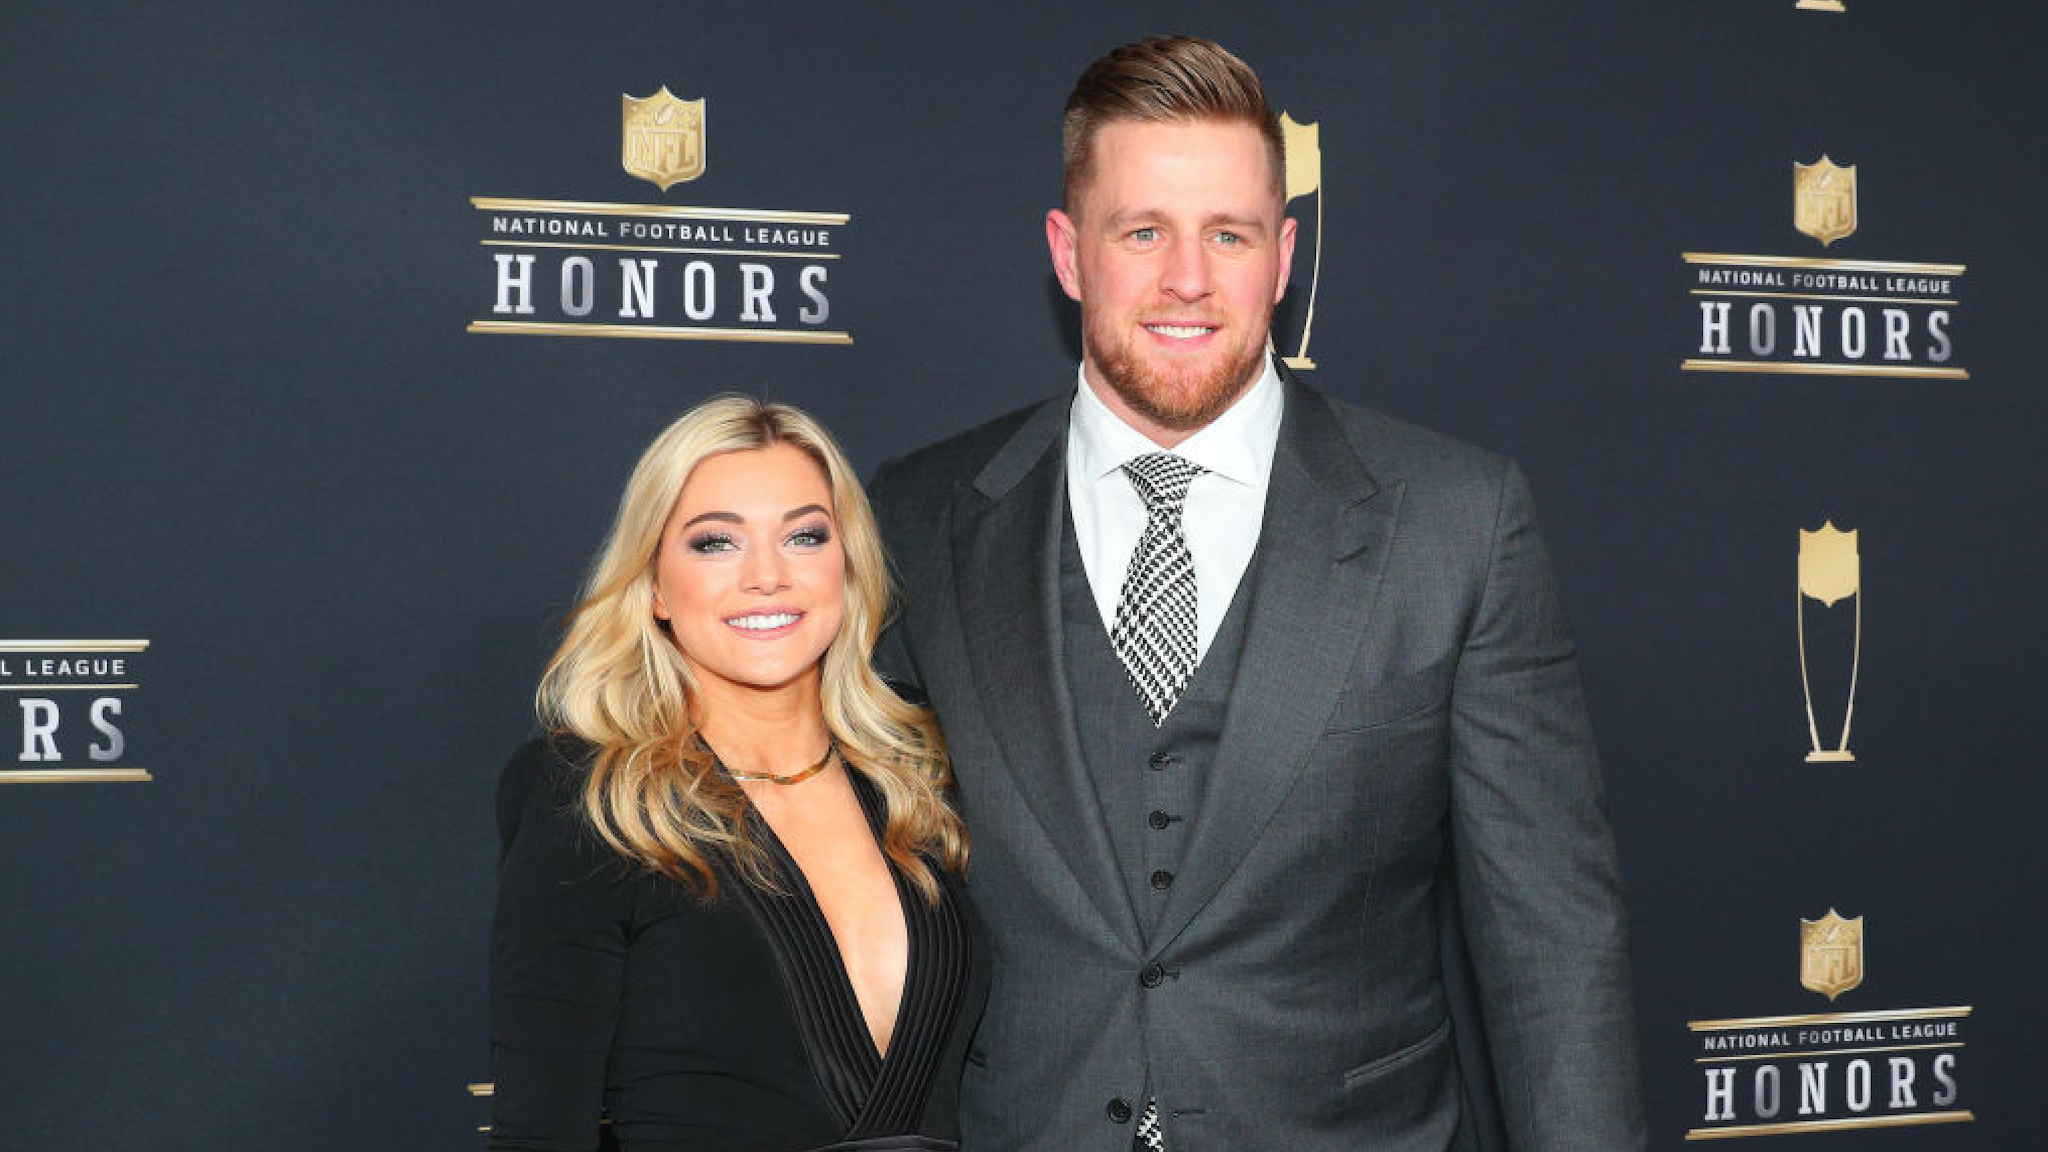 JJ Watt and girlfriend Kealia Ohai pose for Photographs on the Red Carpet at NFL Honors during Super Bowl LII week on February 3, 2018, at Northrop at the University of Minnesota in Minneapolis, MN.